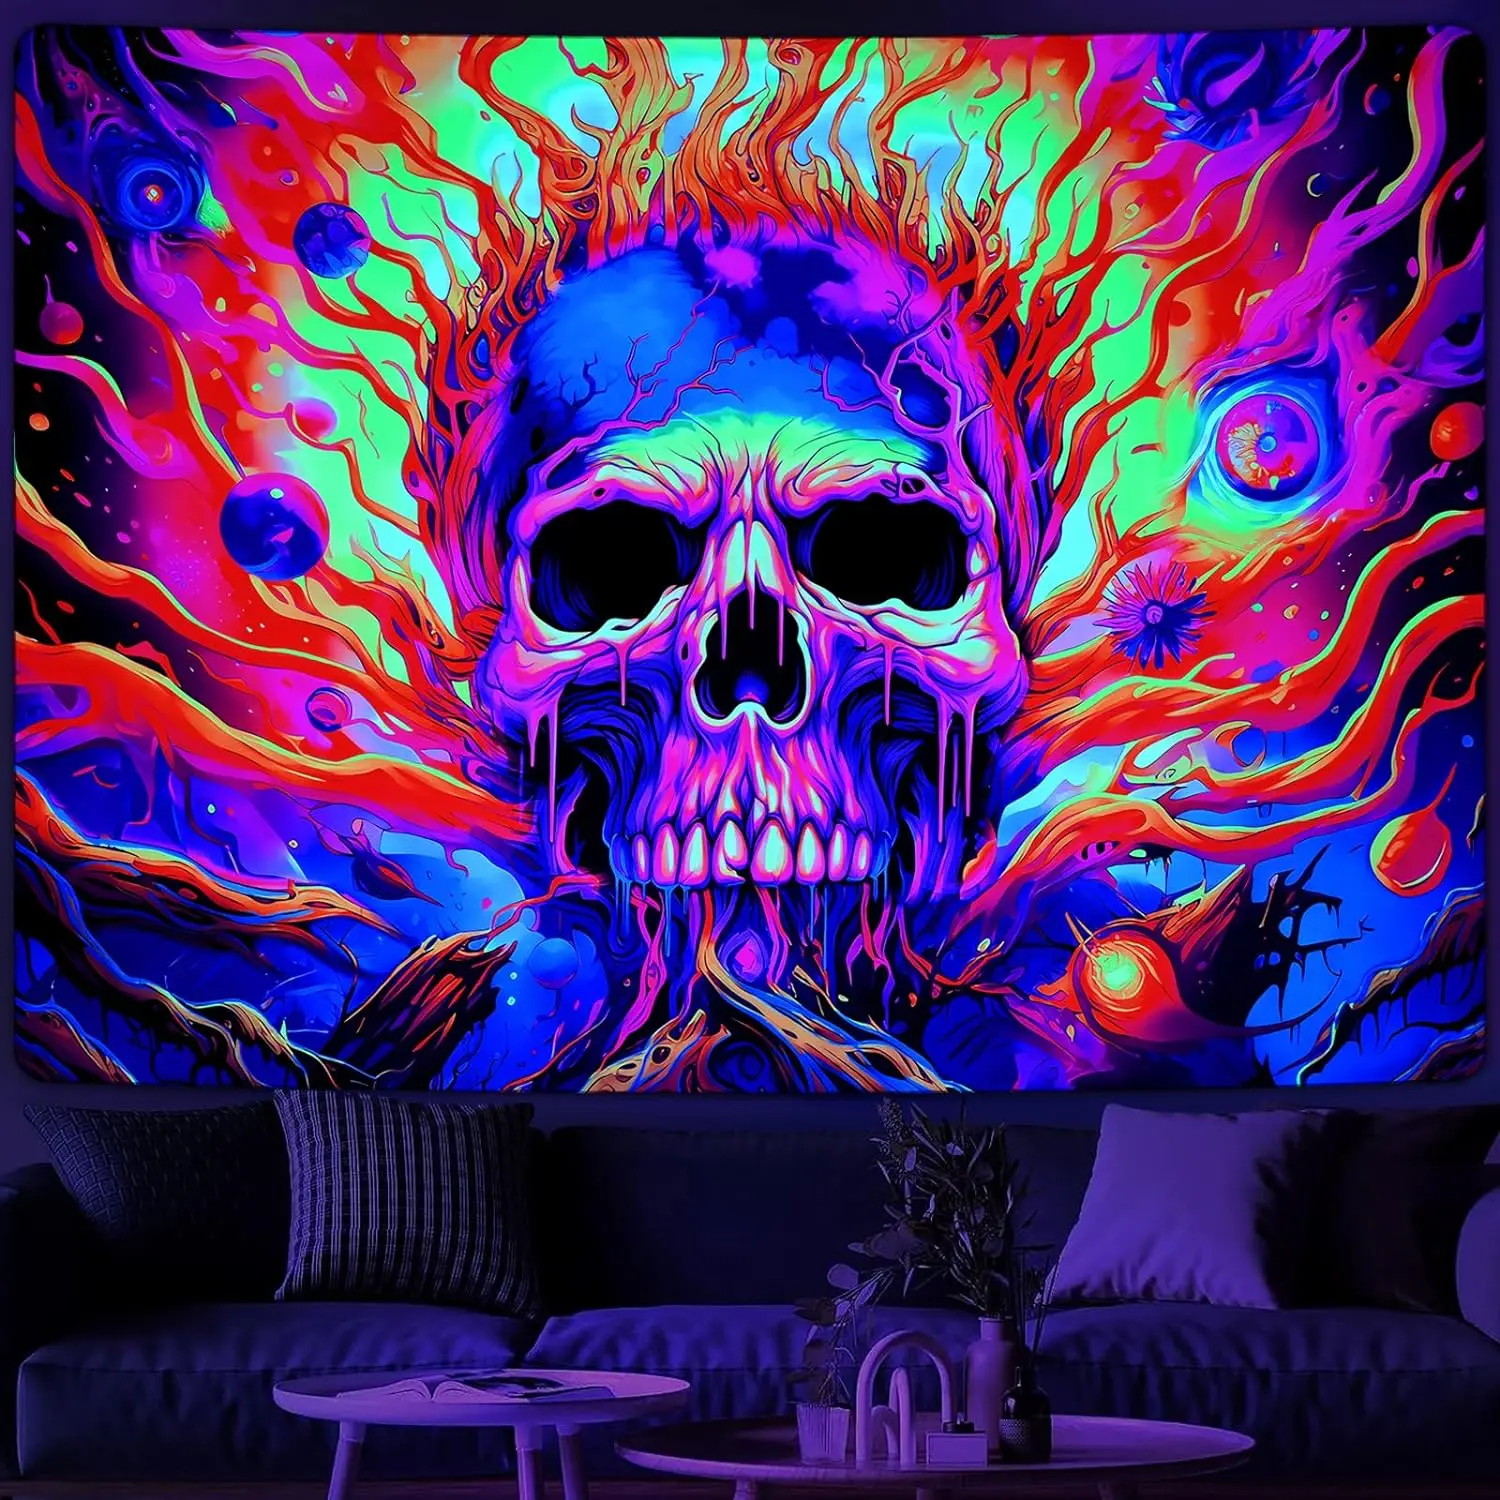 

Blacklight Skull Tapestry Colorful Flames Tapestries Tree Branch Glow in The Dark Eyes Wall Hanging Aesthetic Bderoom Decoration